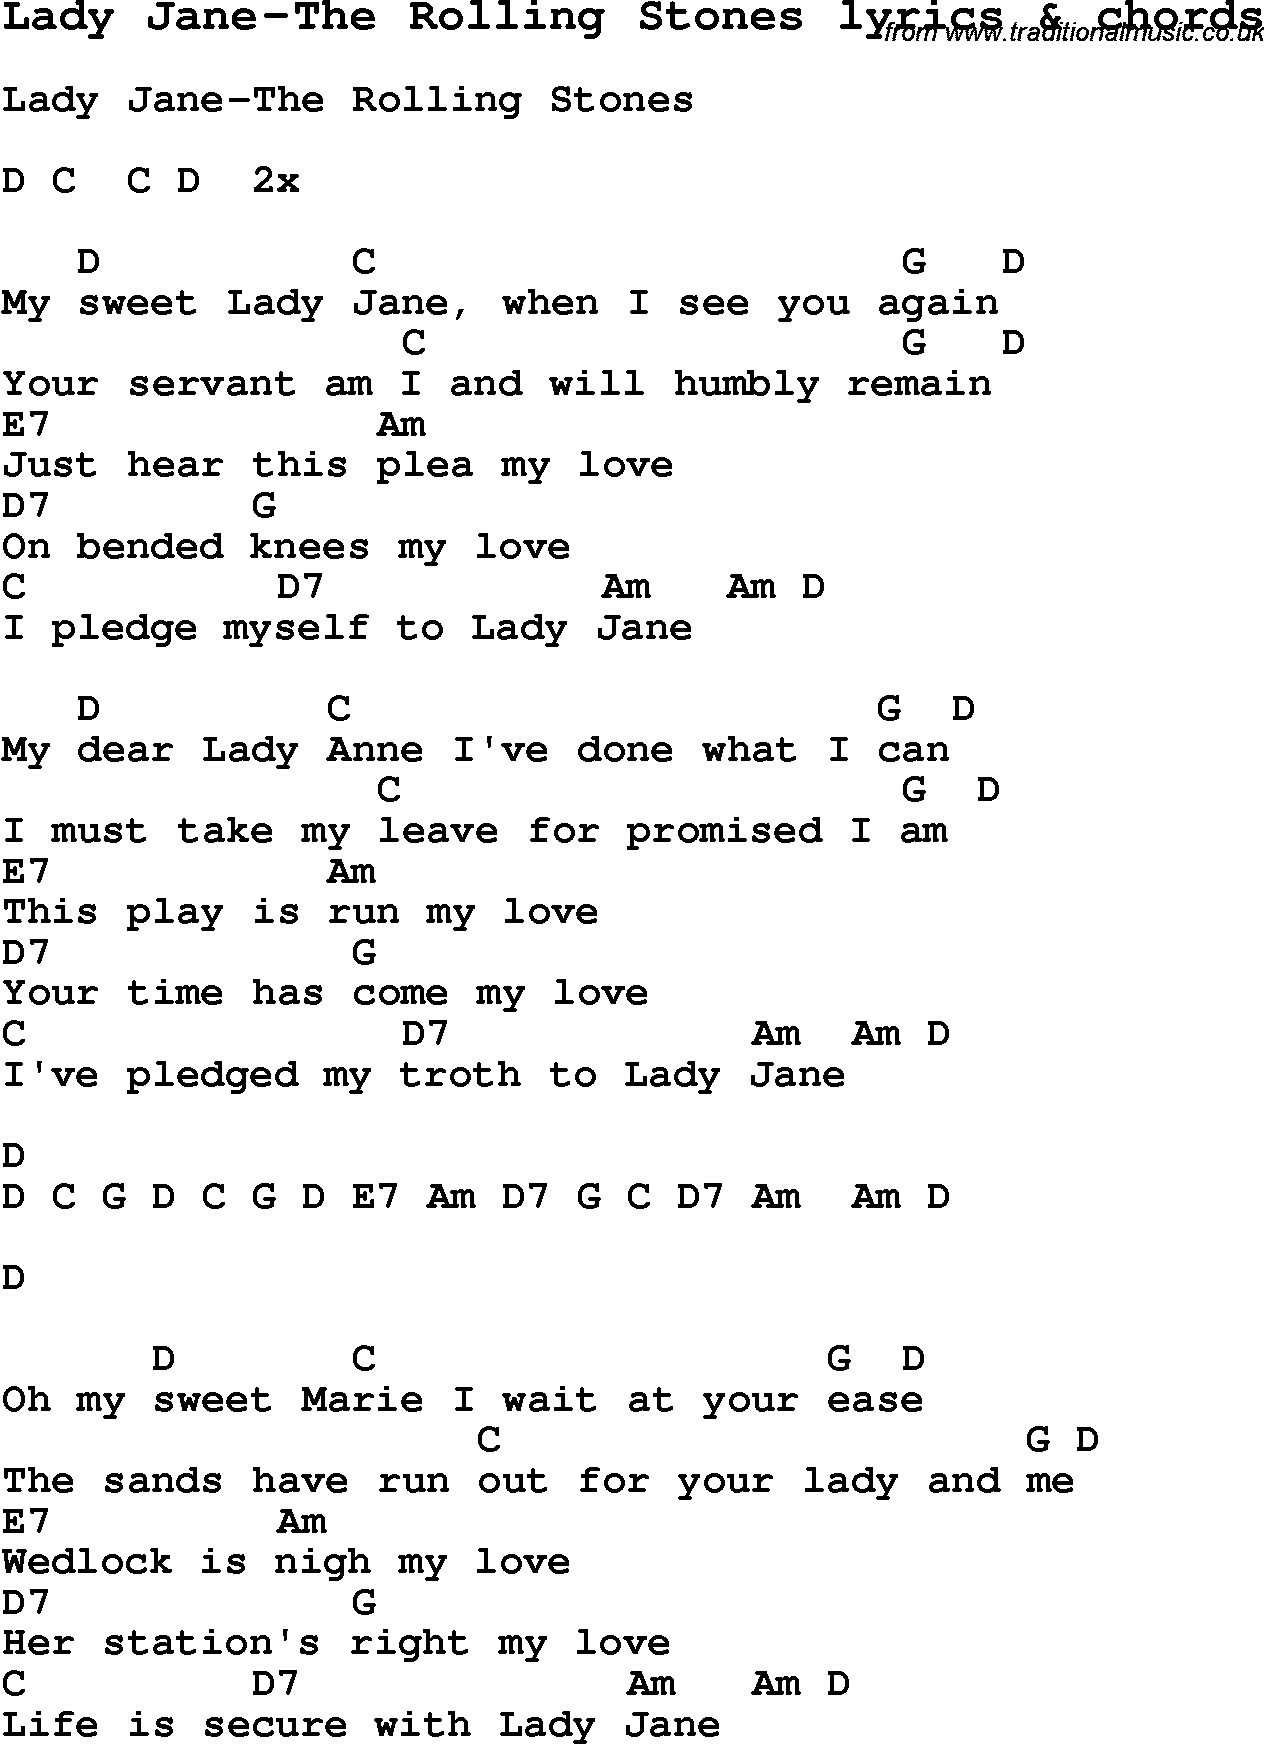 Love Song Lyrics for:Lady Jane-The Rolling Stones with chords.